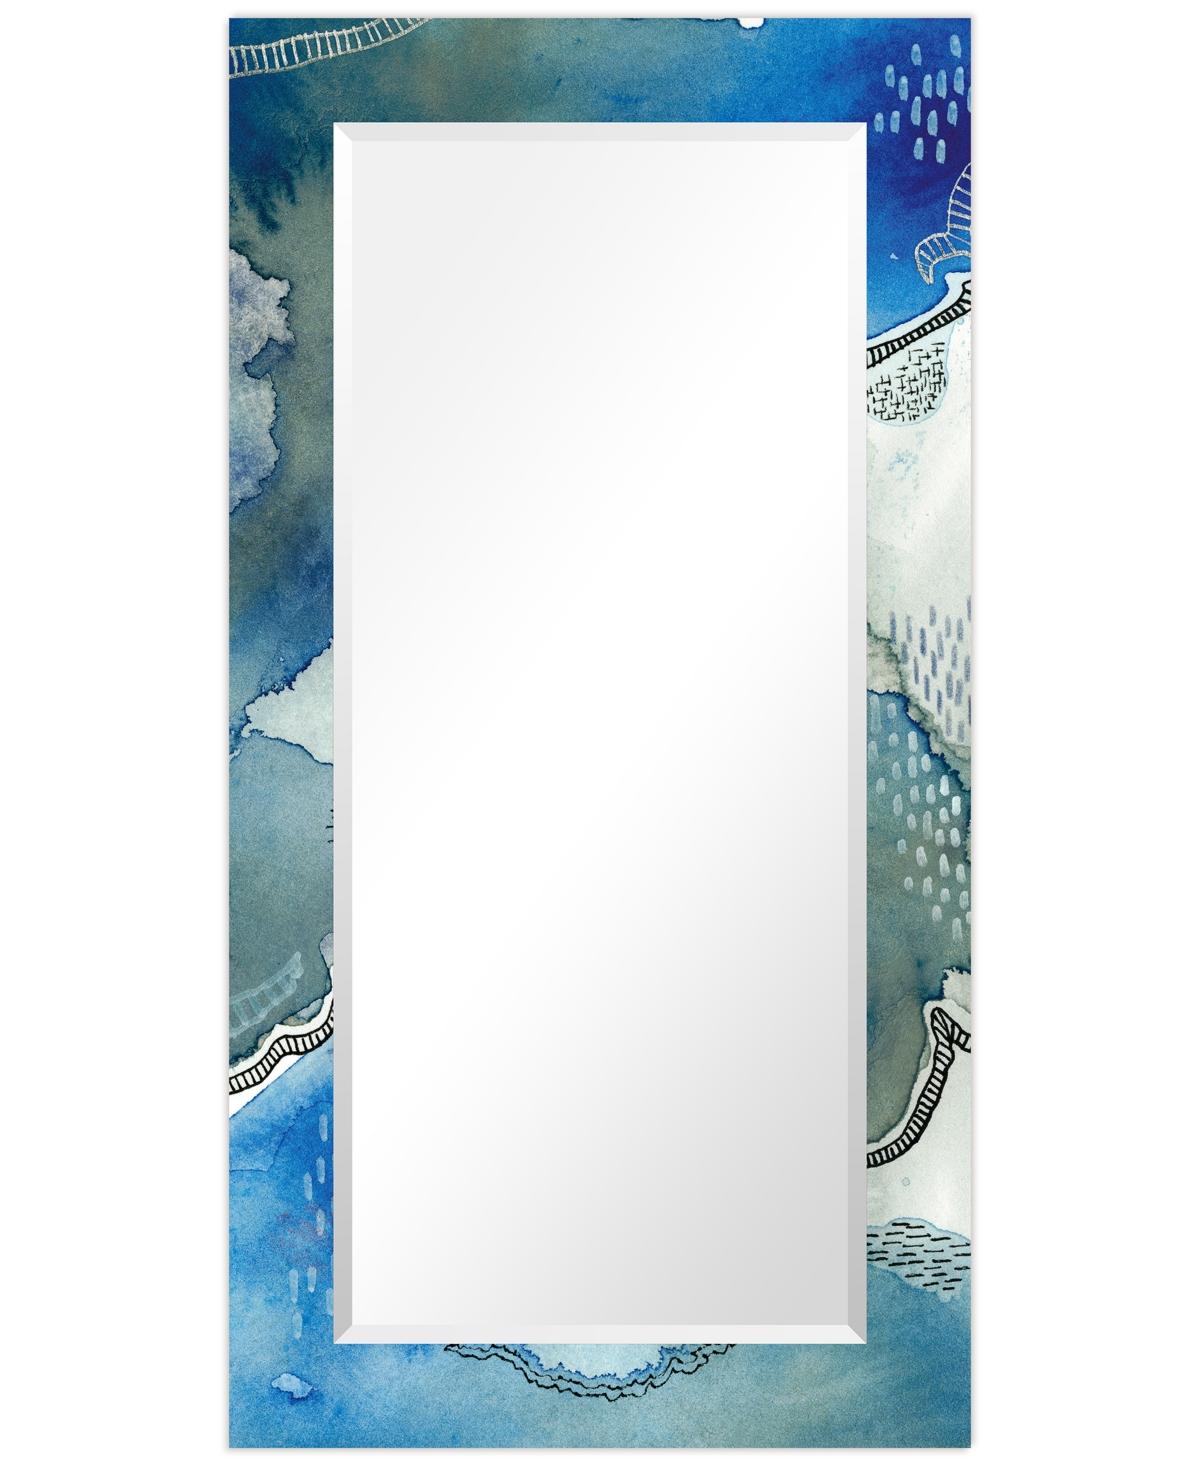 'Subtle Blues' Rectangular On Free Floating Printed Tempered Art Glass Beveled Mirror, 54" x 28" - Multicolor